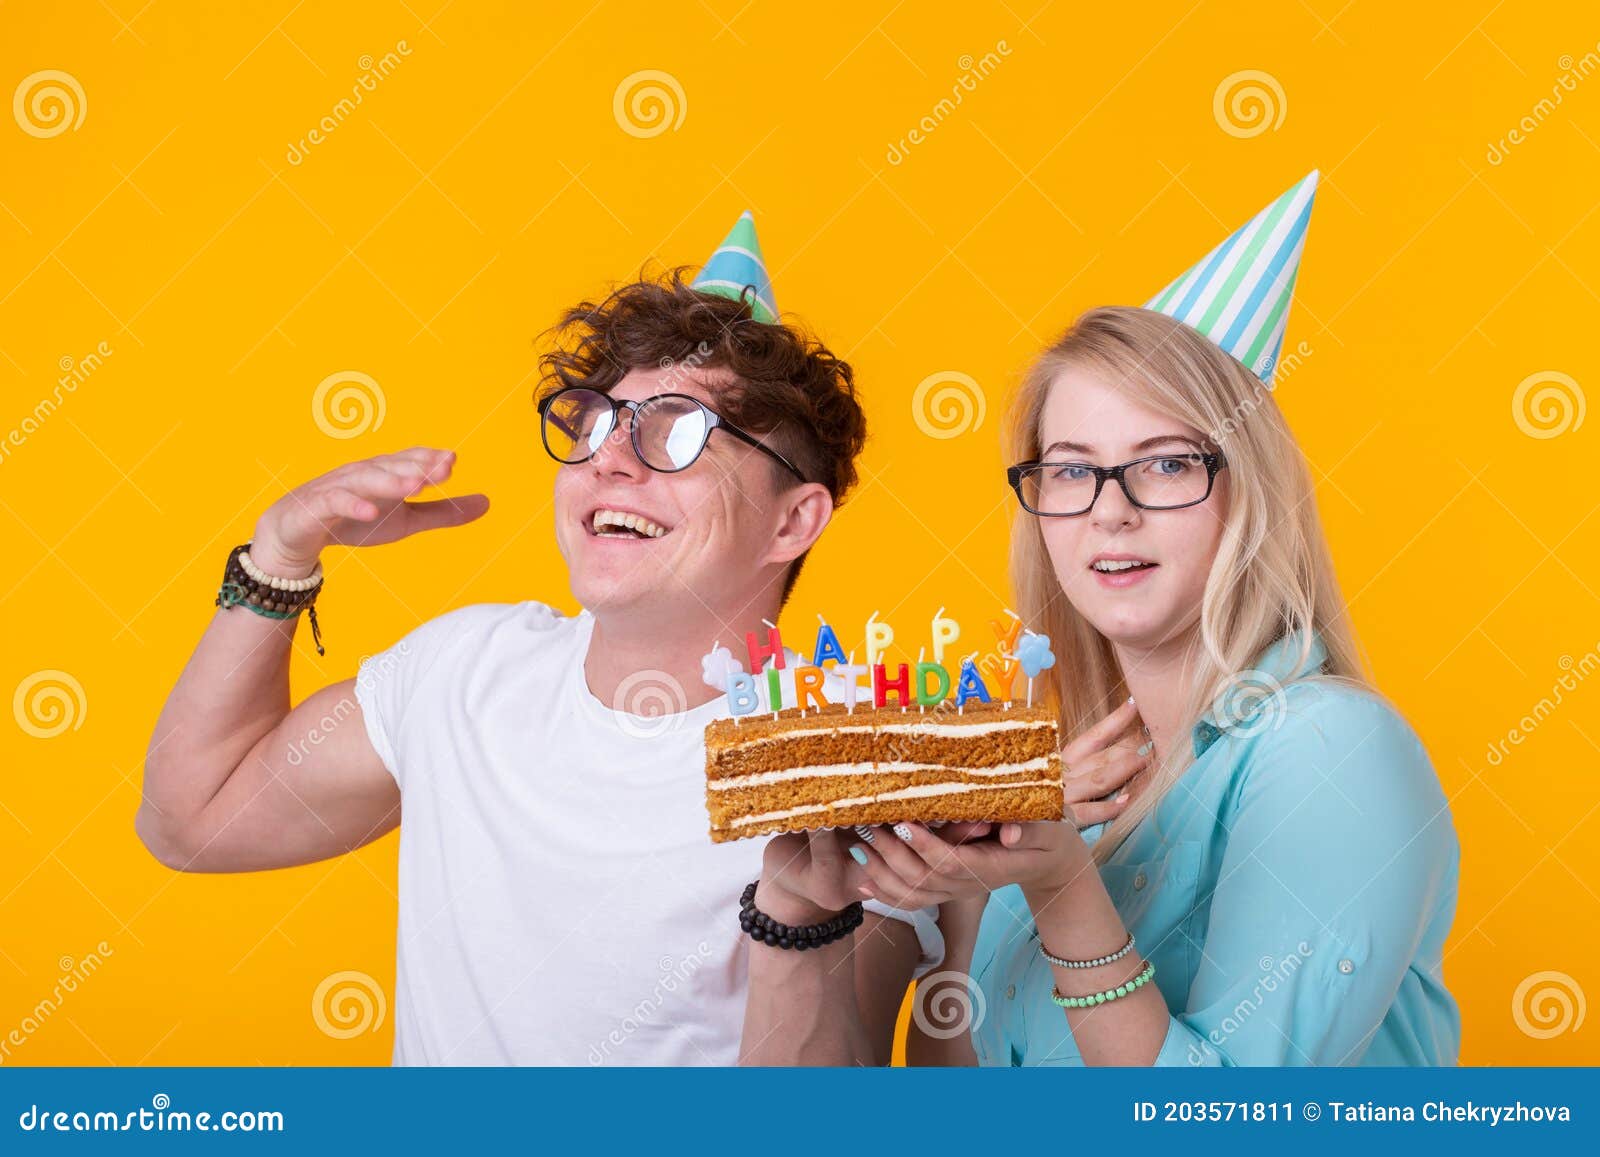 Funny Young Couple in Paper Caps and with a Cake Make a Foolish ...